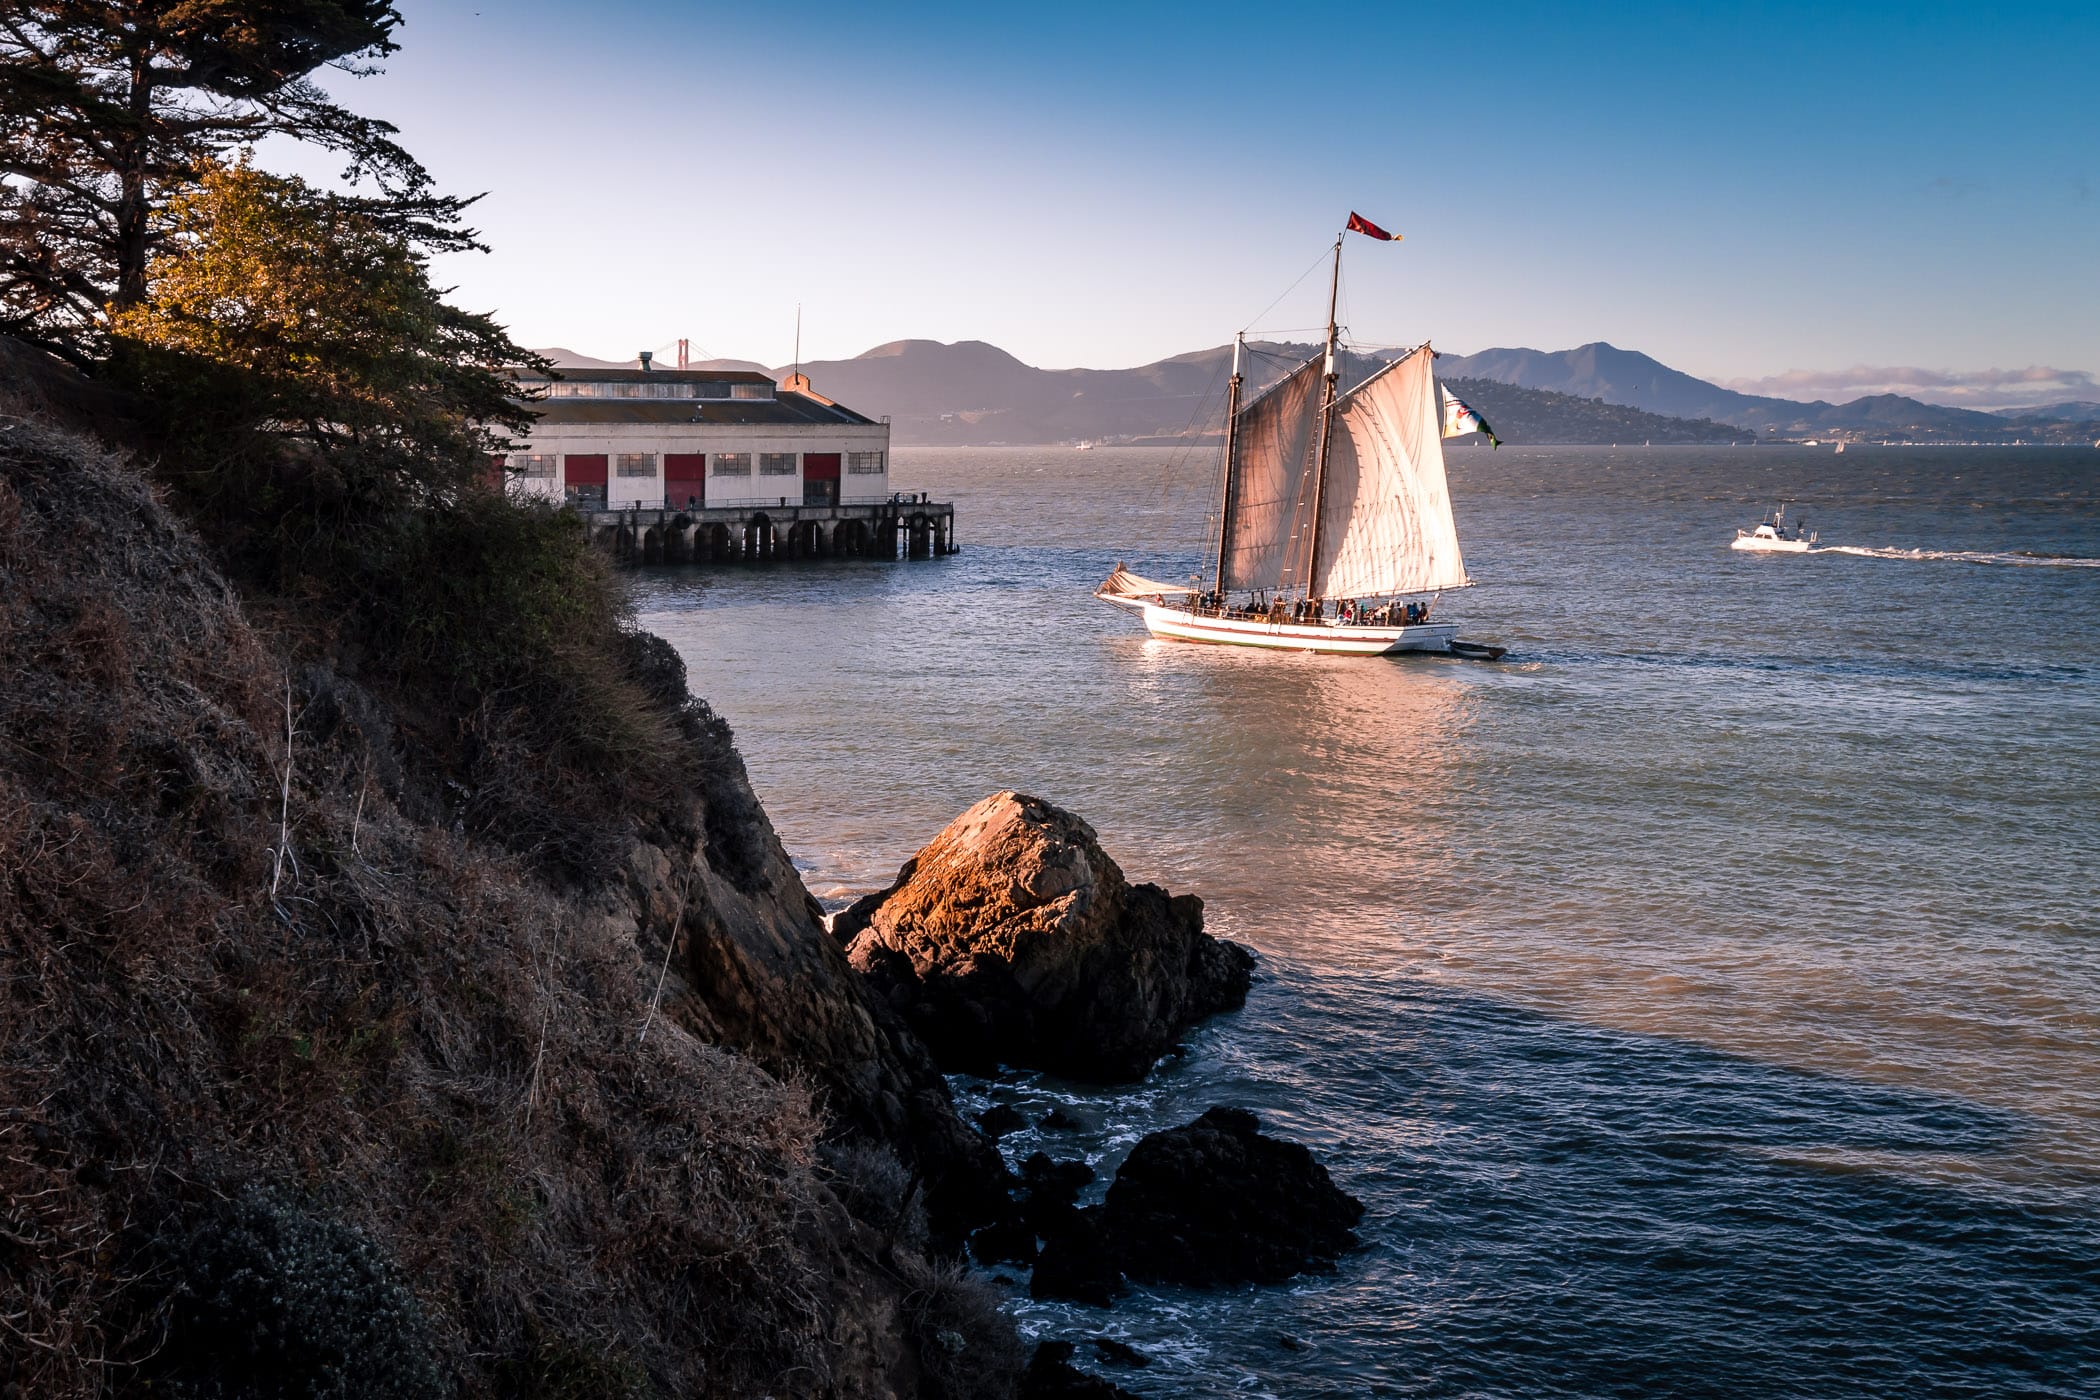 The 1891 scow schooner Alma, in the collection of the San Francisco Maritime National Historical Park, sails near the Festival Pavilion at the Fort Mason Center for Arts & Culture in San Francisco Bay.